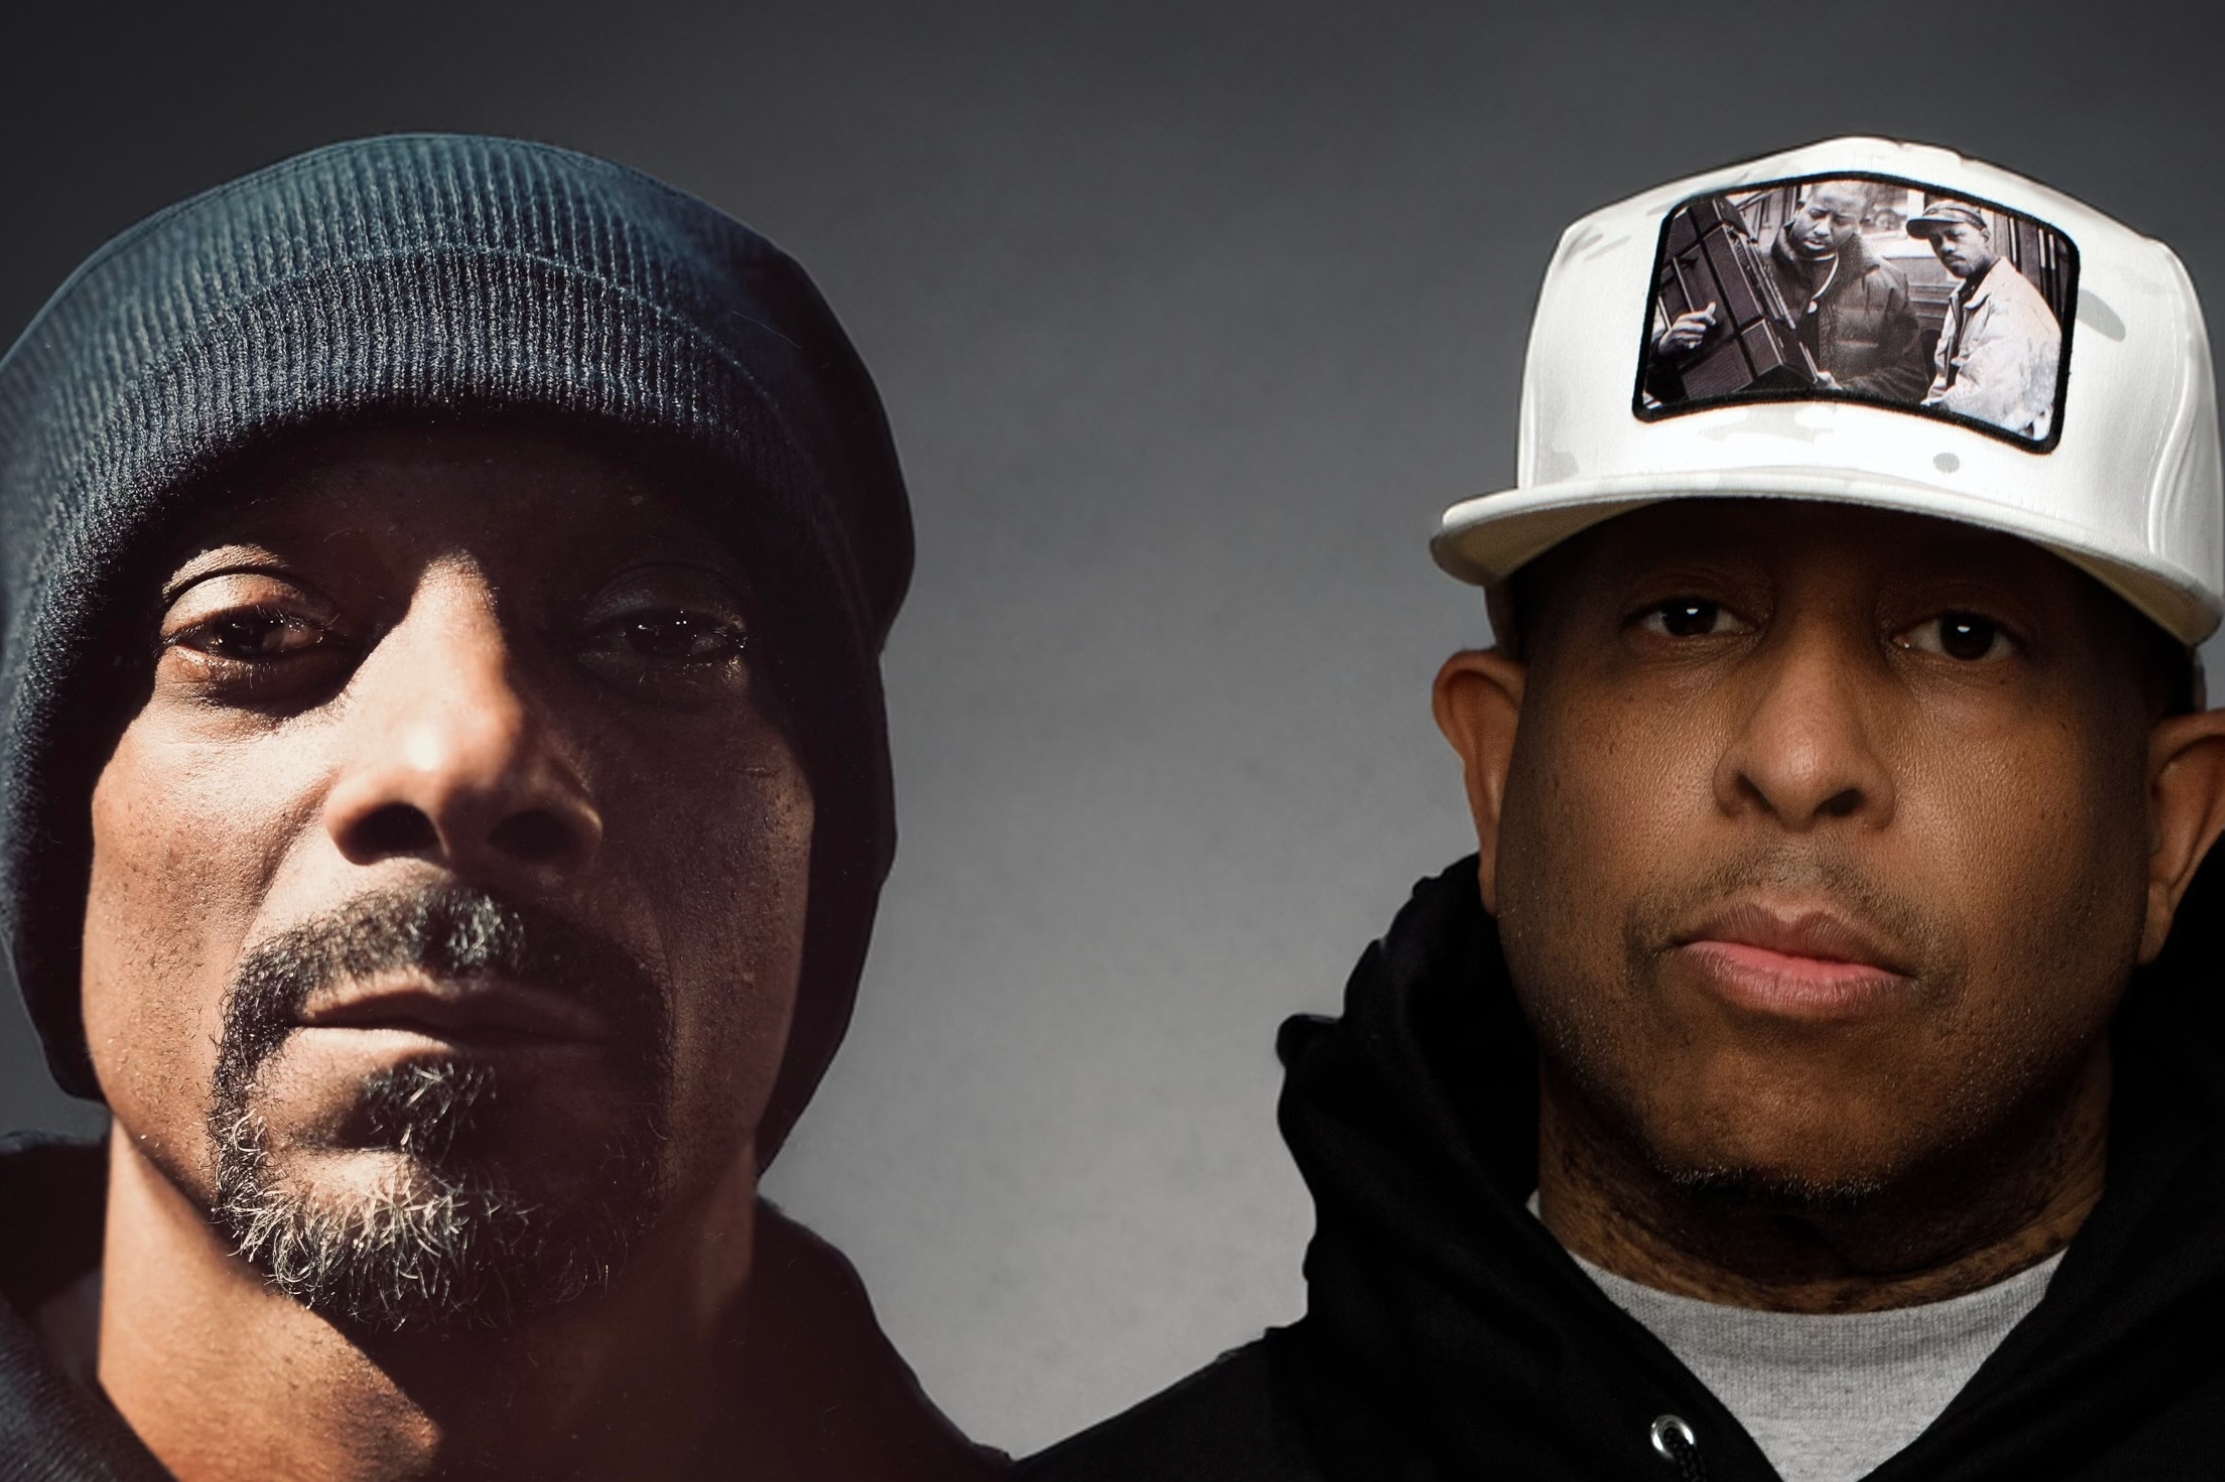 Snoop Dogg Namechecks Ice-T, 2Pac, Ice Cube & More On New DJ Premier Collab #2Pac